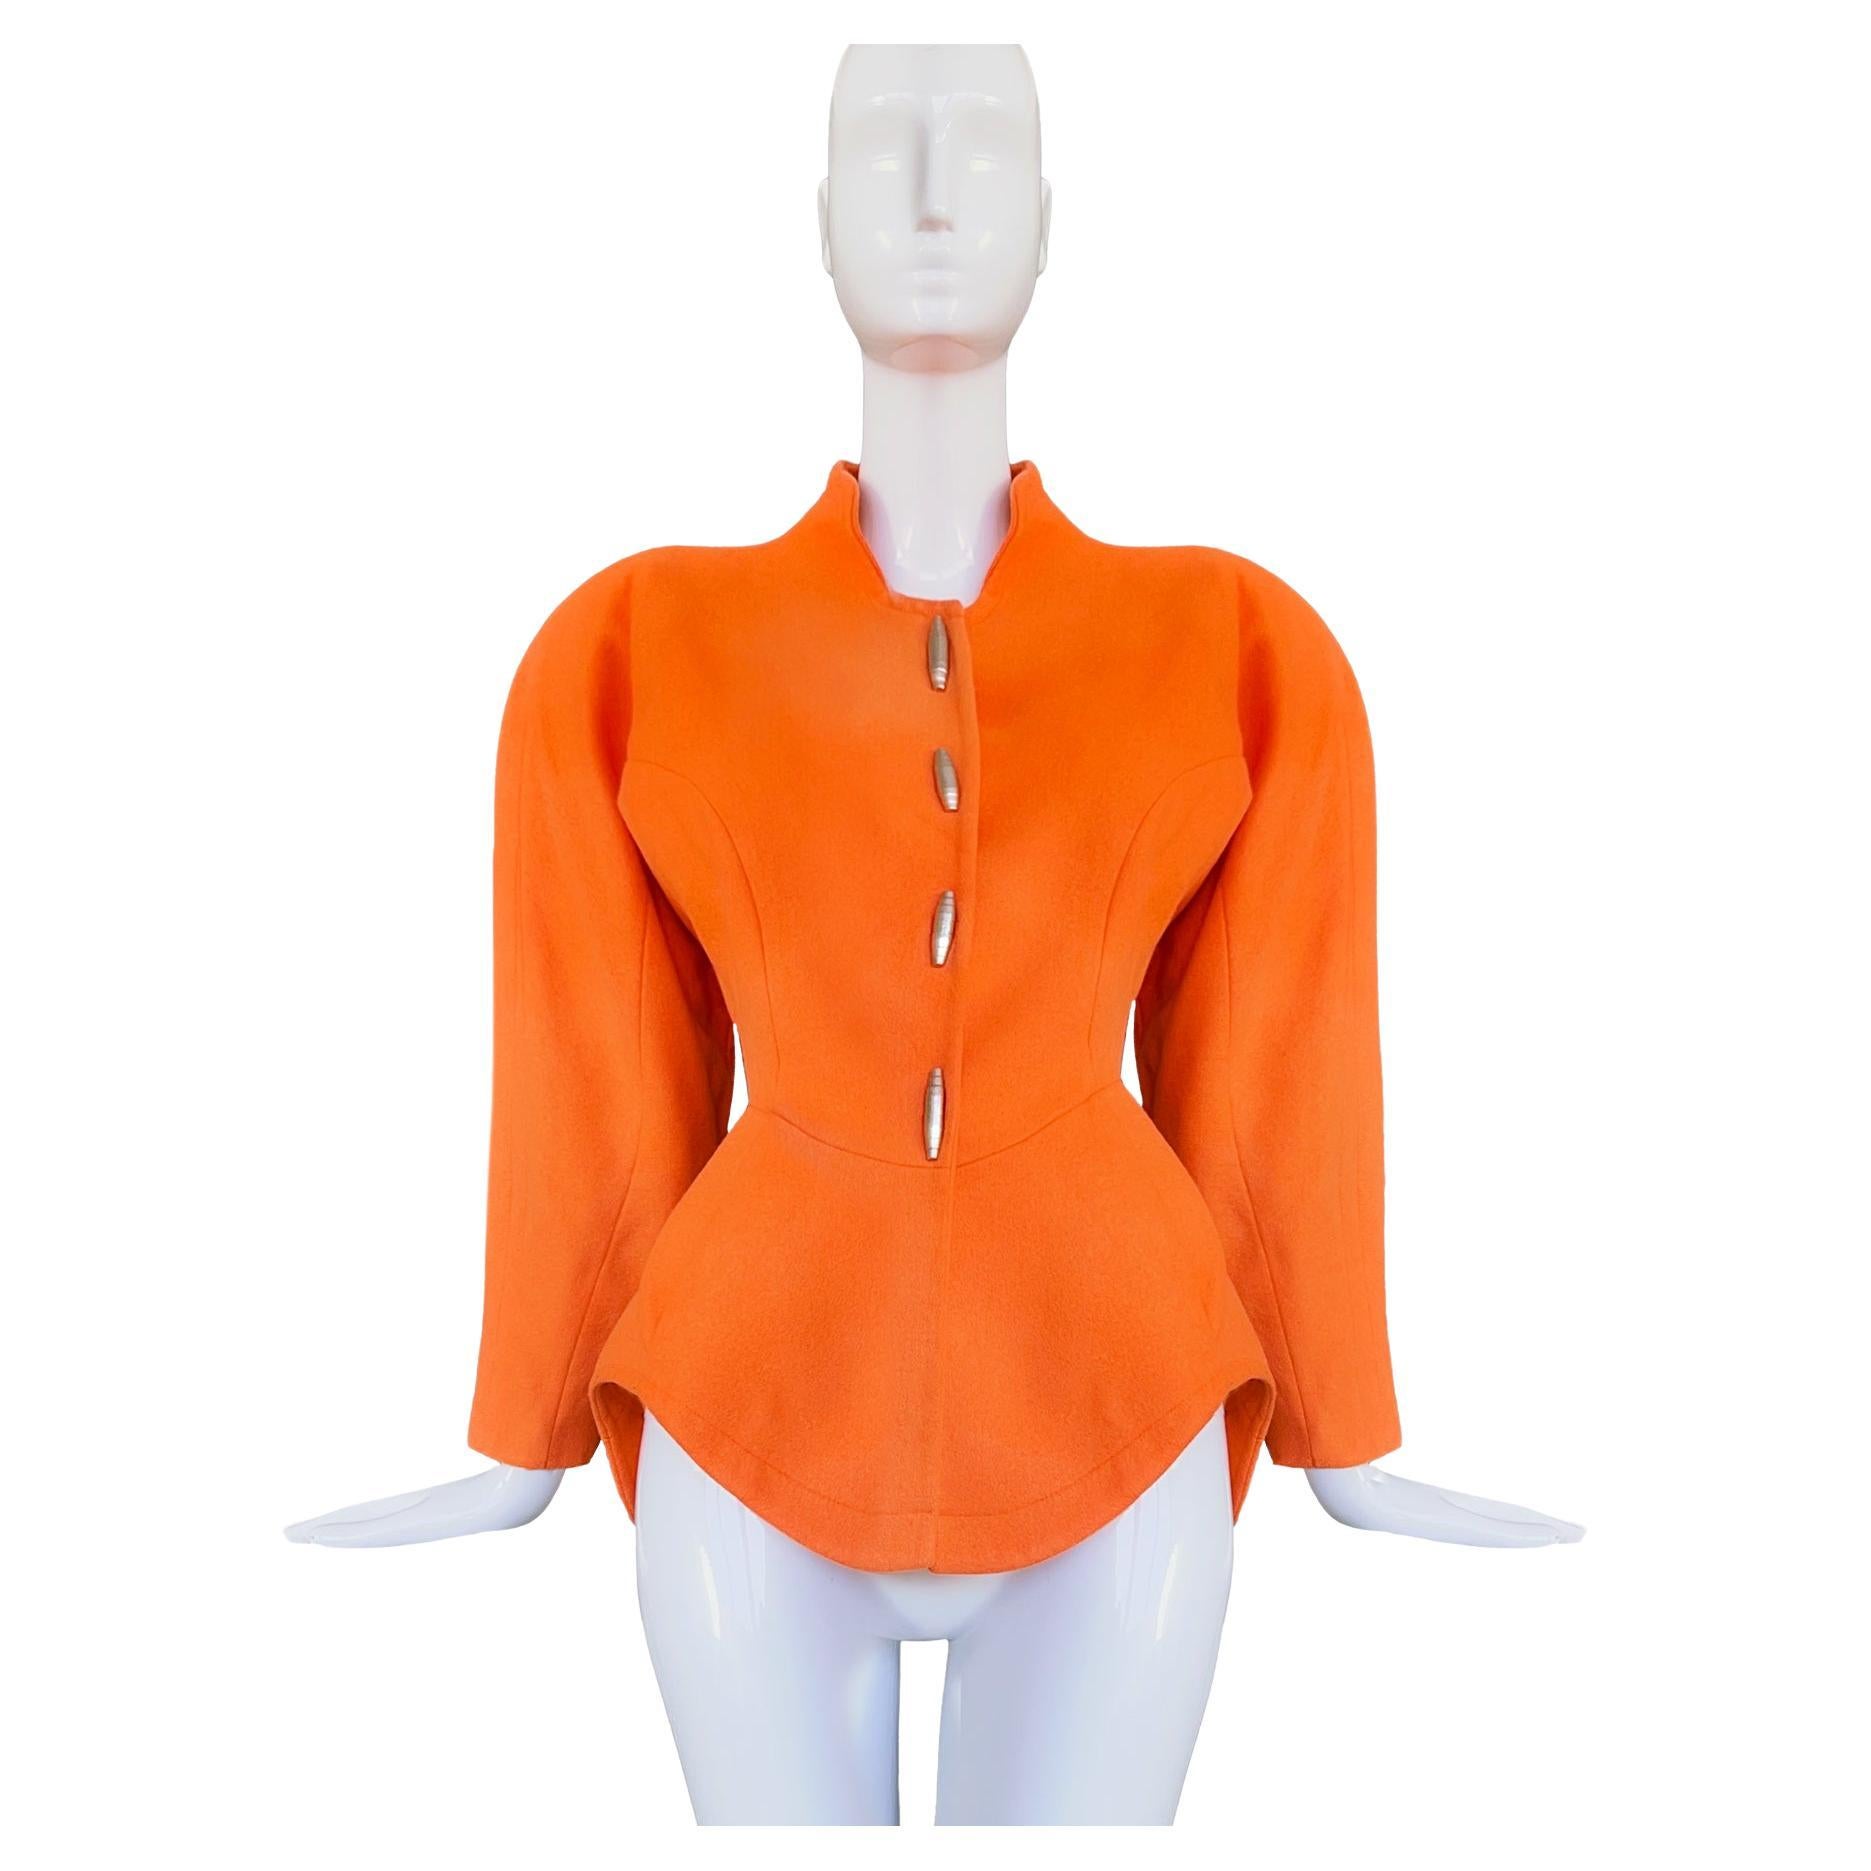 Thierry Mugler 1991 Documented Sculptural Orange Jacket with Metal Details For Sale